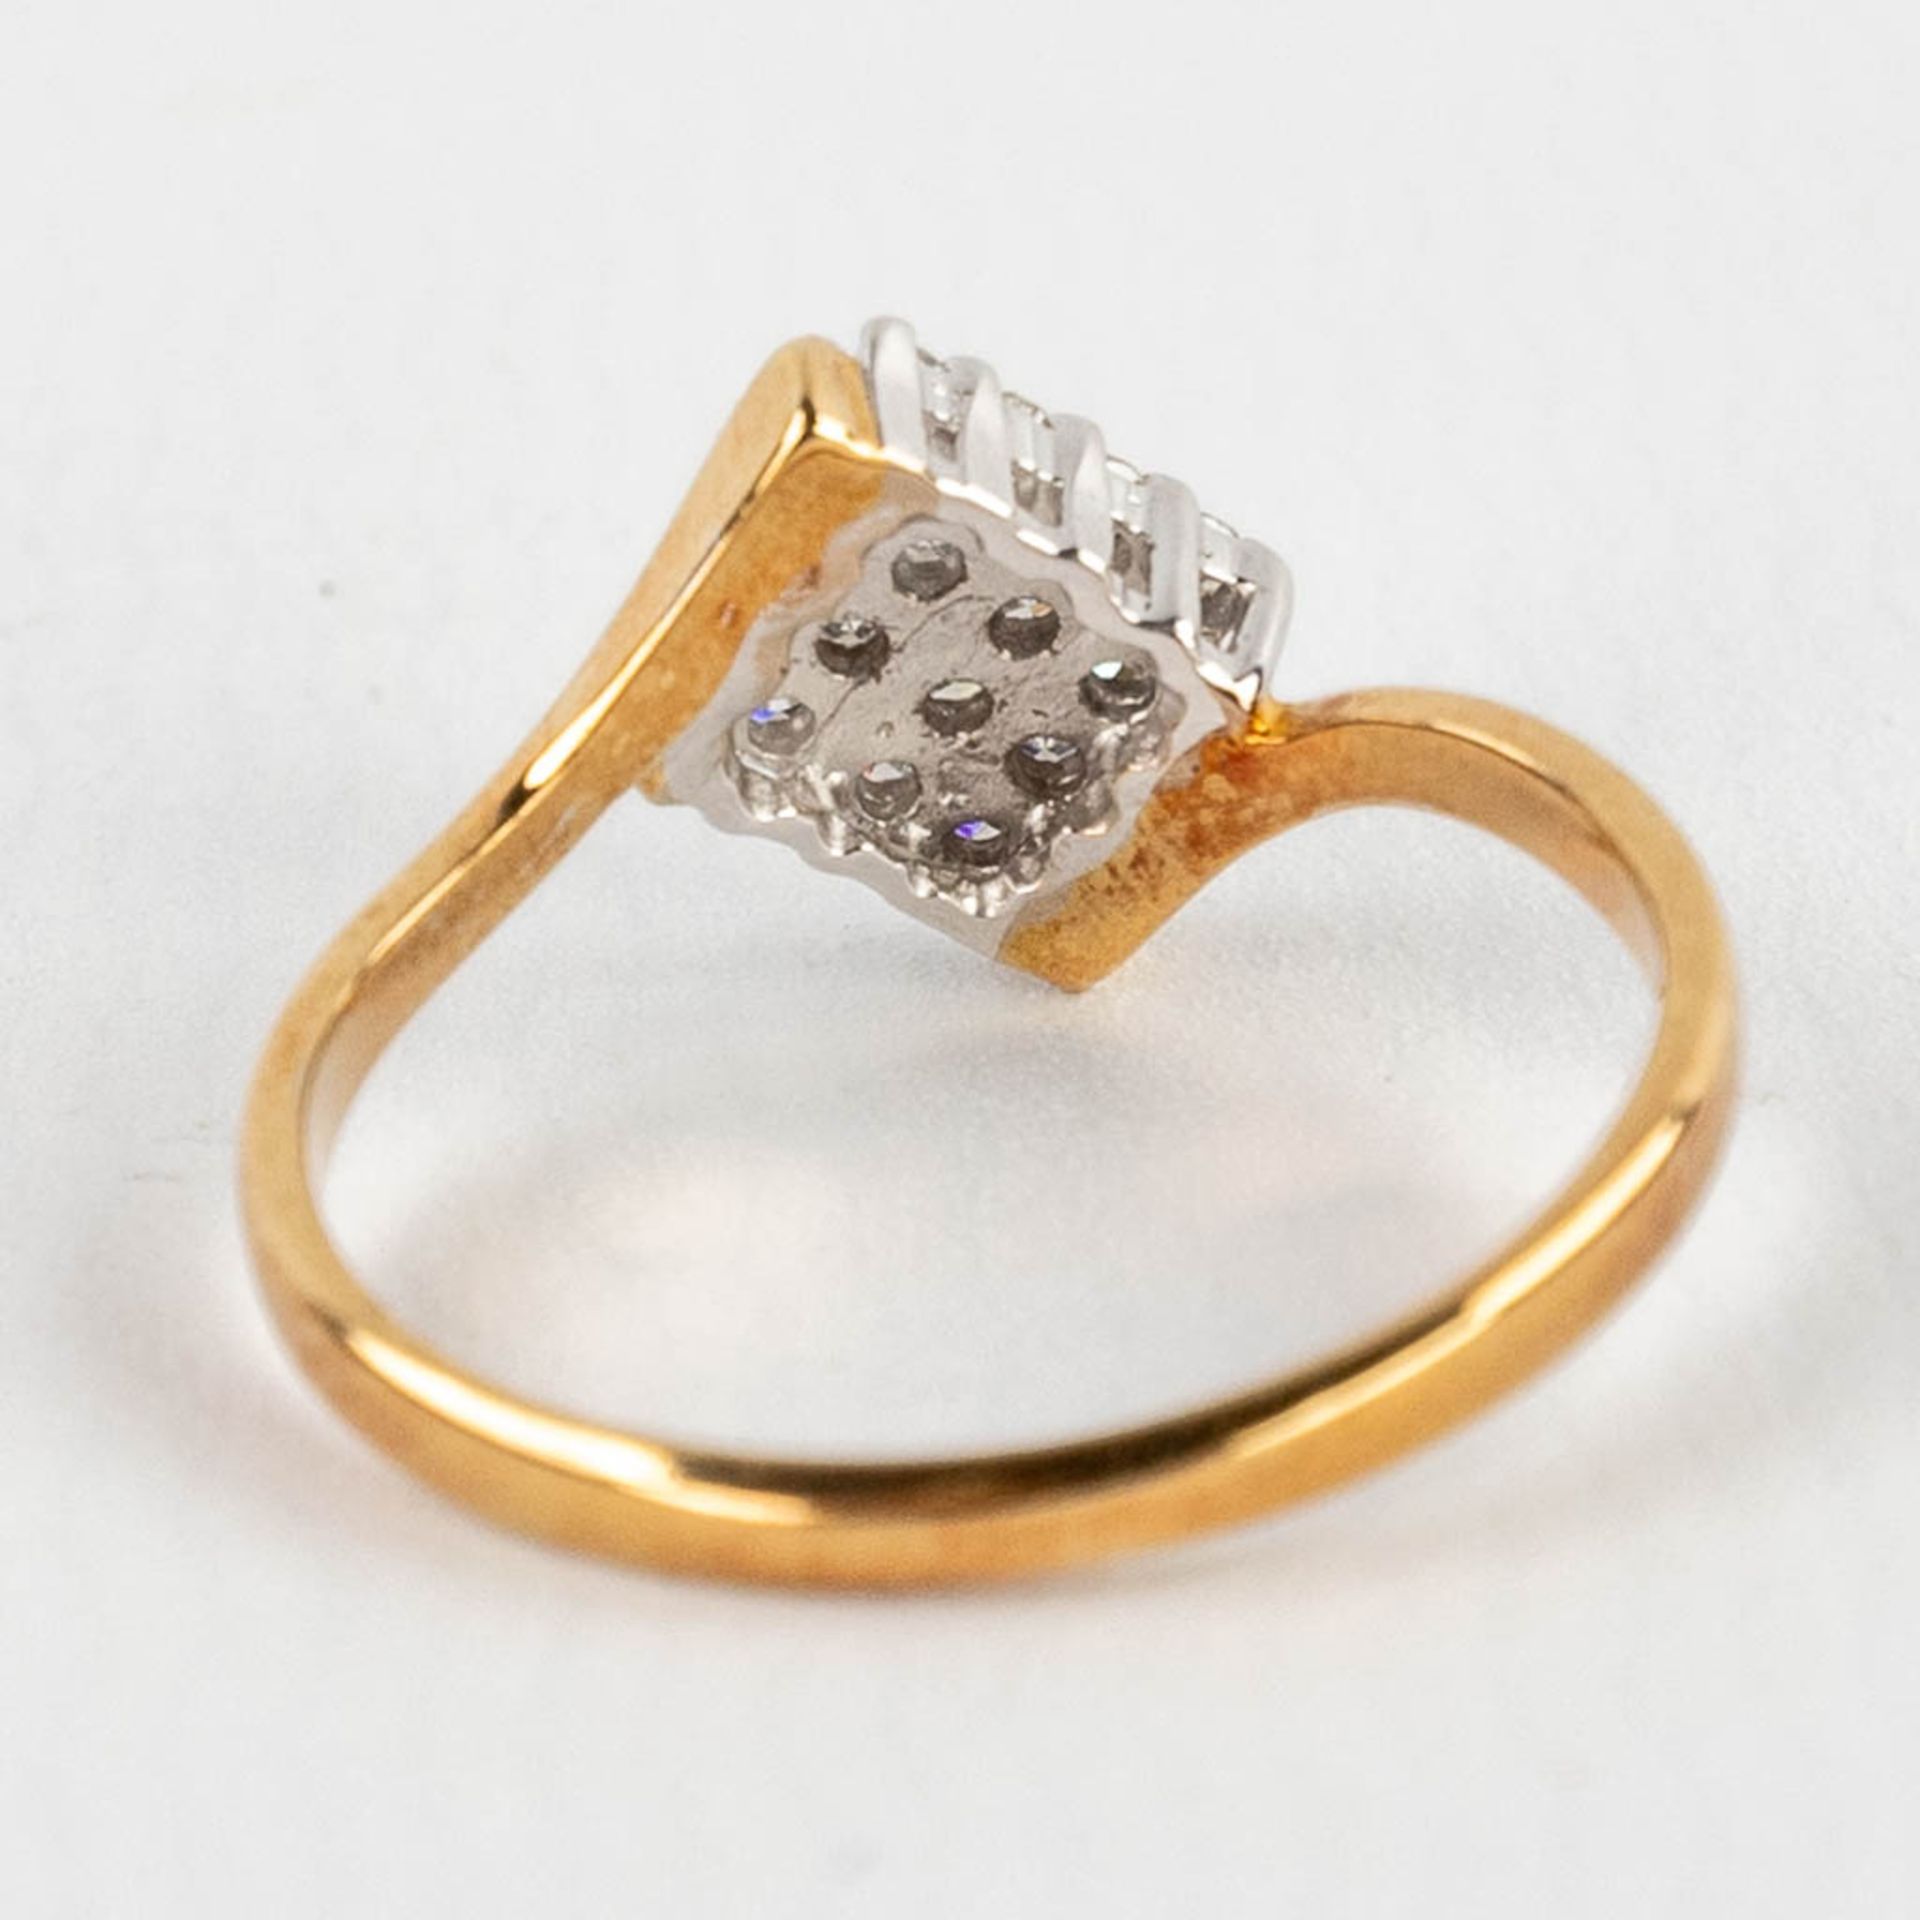 A yellow and white gold ring finished with 9 brilliants. 2,14g. size: 51 - Image 7 of 12